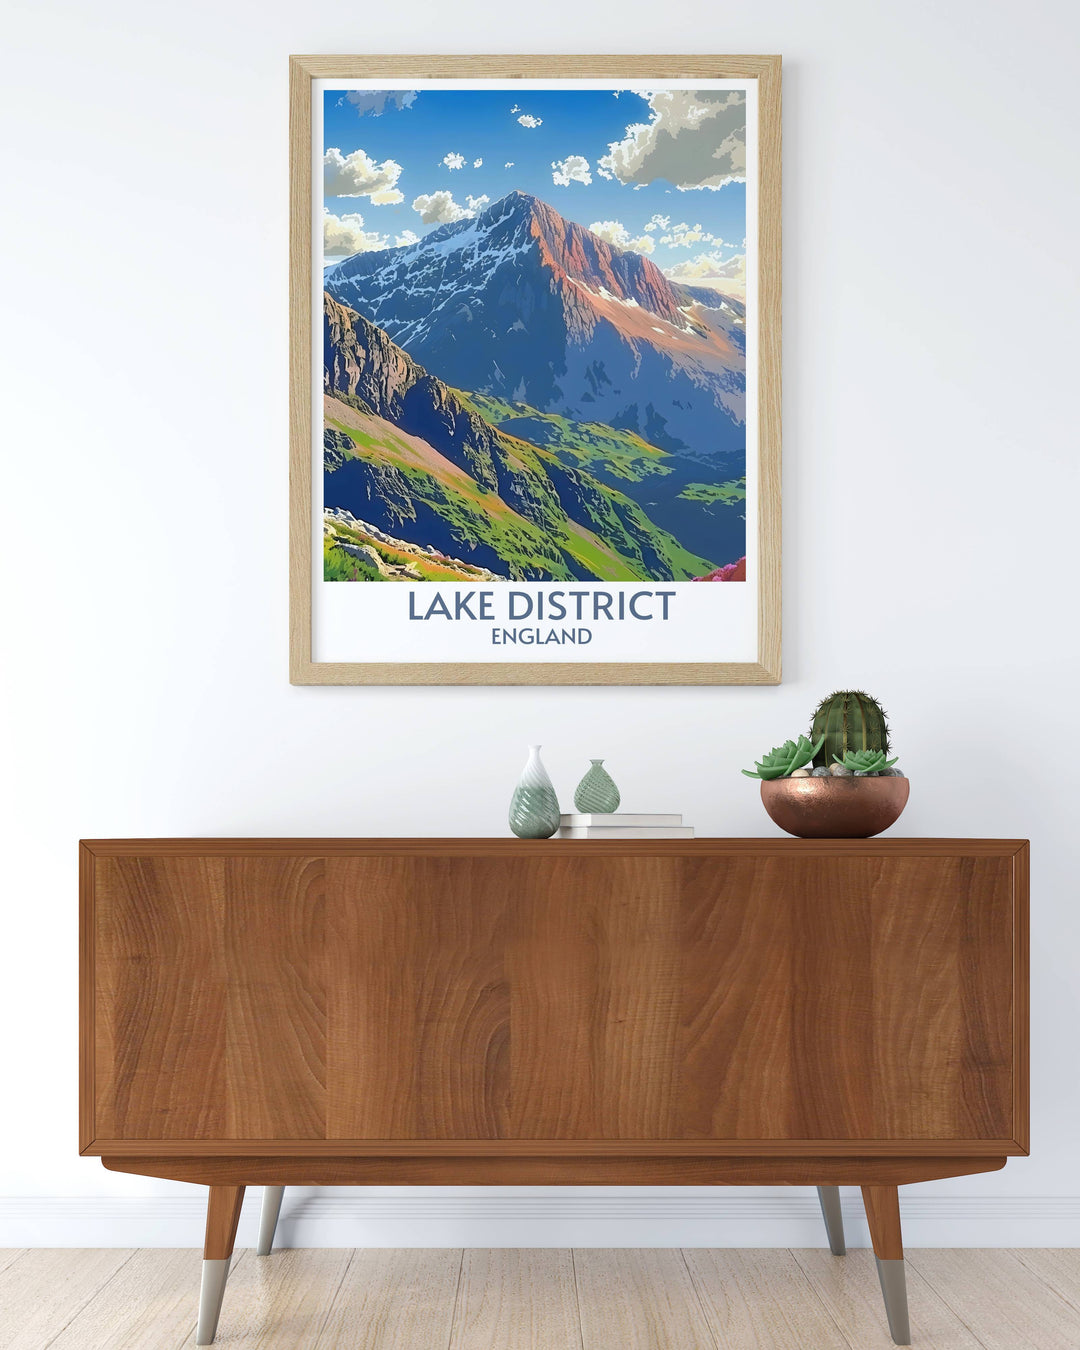 Elegant Scafell Peak print perfect for Lake District lovers. This high quality art piece brings the wild and untamed beauty of the Lake District into your home, making it an ideal gift for those who appreciate nature and adventure.